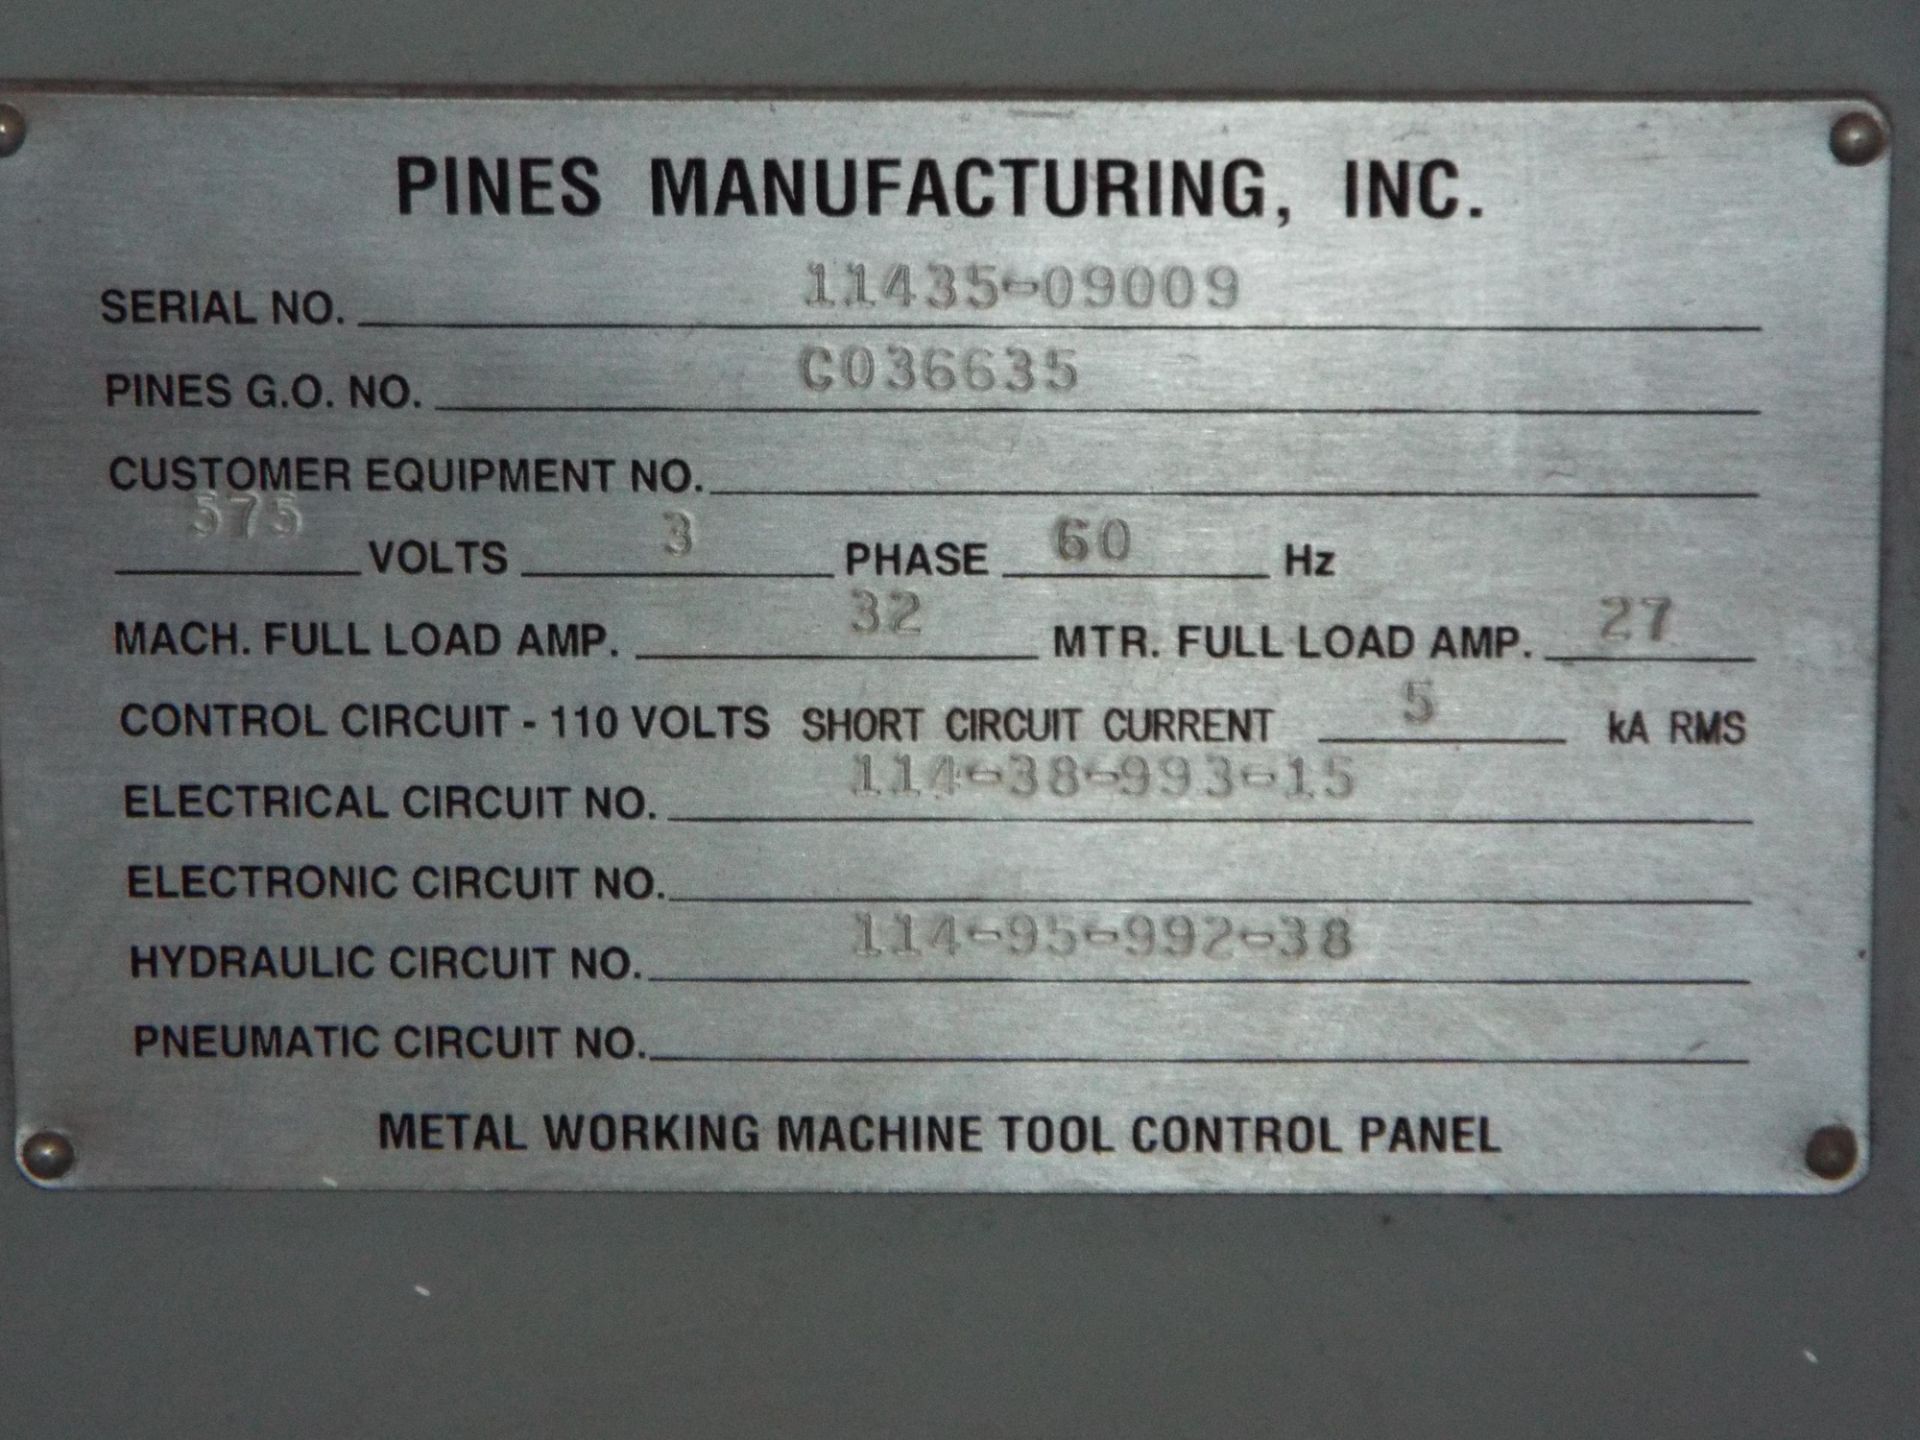 PINES (2008) MODEL NO. 4 HYDRAULIC HORIZONTAL ROTARY PIPE BENDING MACHINE WITH TOUCH SCREEN CONTROL, - Image 8 of 8